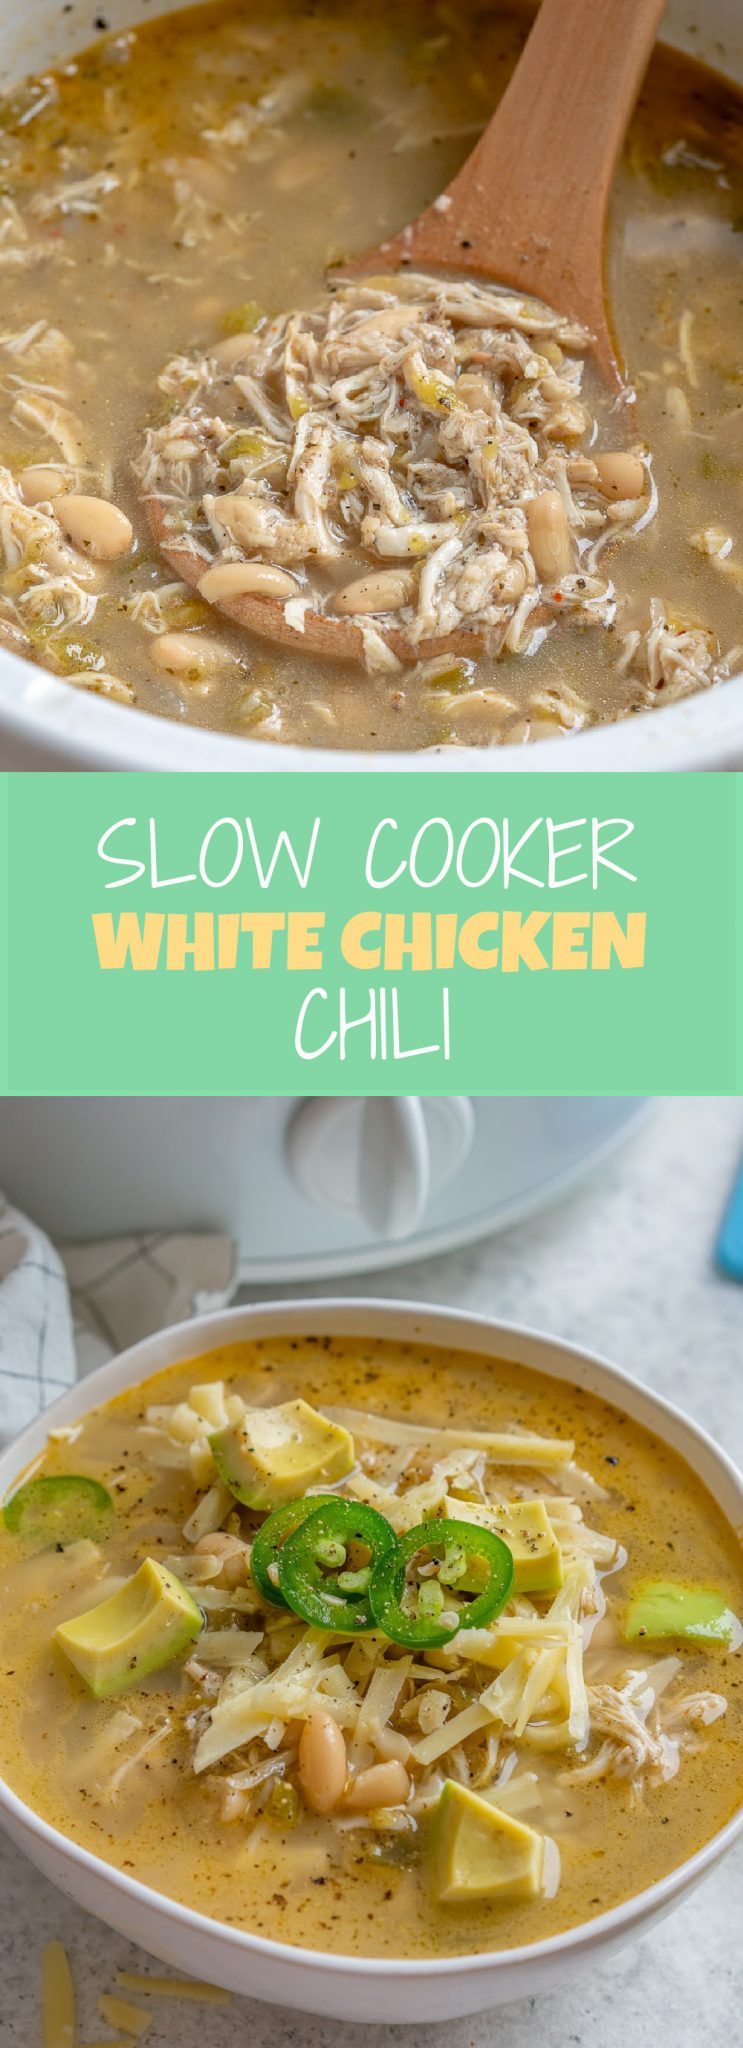 Slow Cooker White Chicken Chili | Clean Food Crush